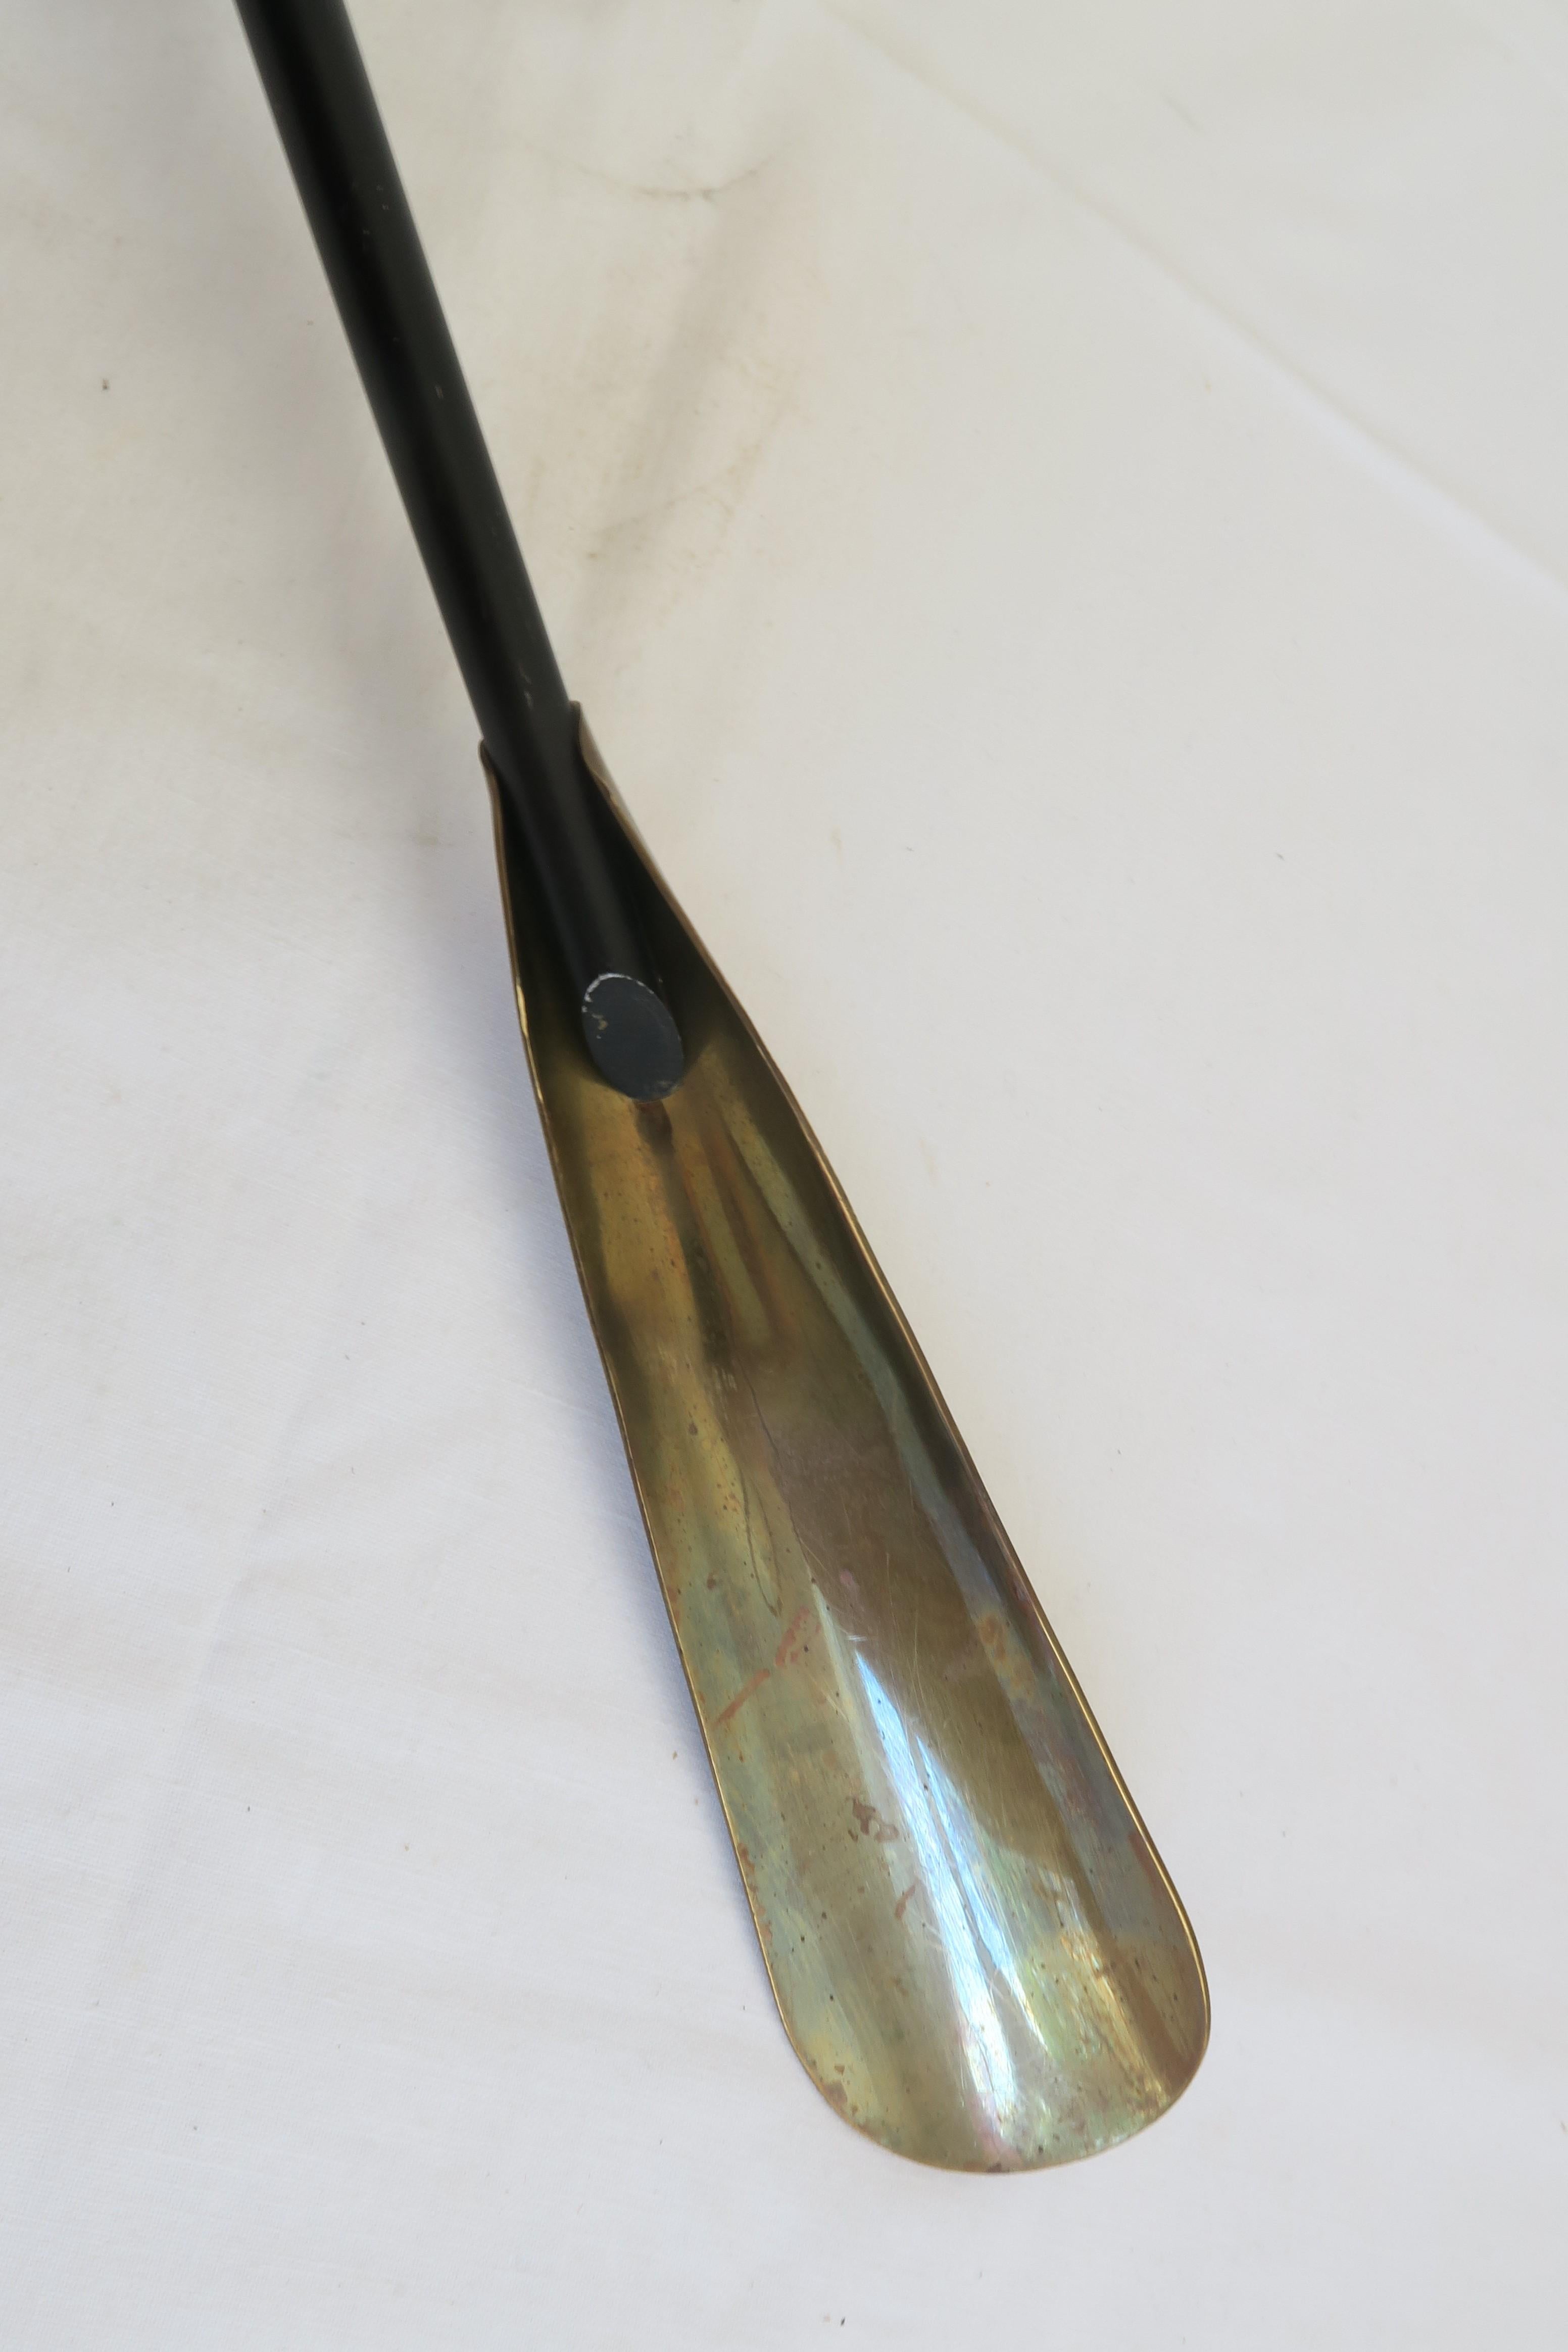 For sale is a nice tall shoehorn. It was made from iron which has been painted black, embellished with brass elements and a bright red leather wrapping on the handle. It is representative of Mid-Century design and looks similar to designs of